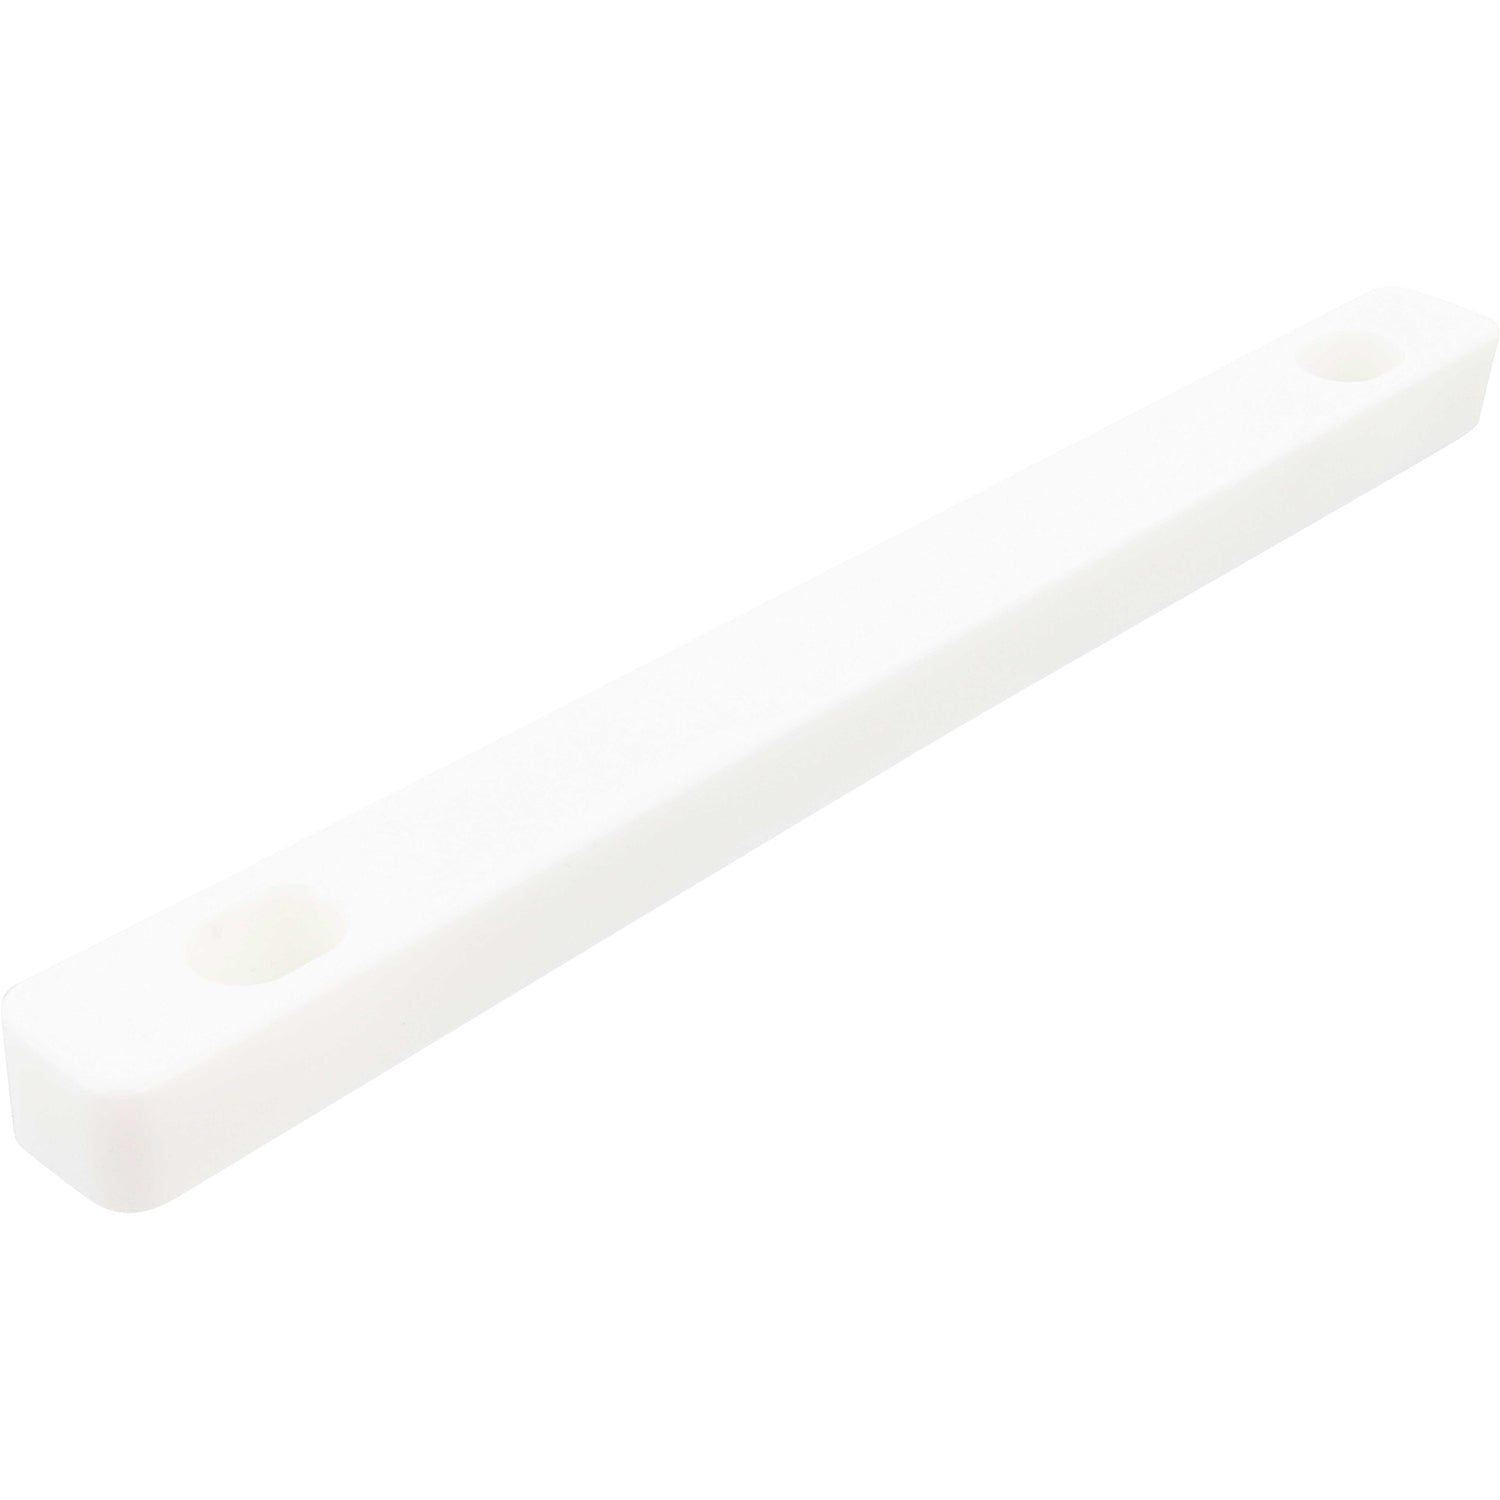 White HDPE rectangular block/rail with two drilled holes on each end for mounting.  Shown on white background. 